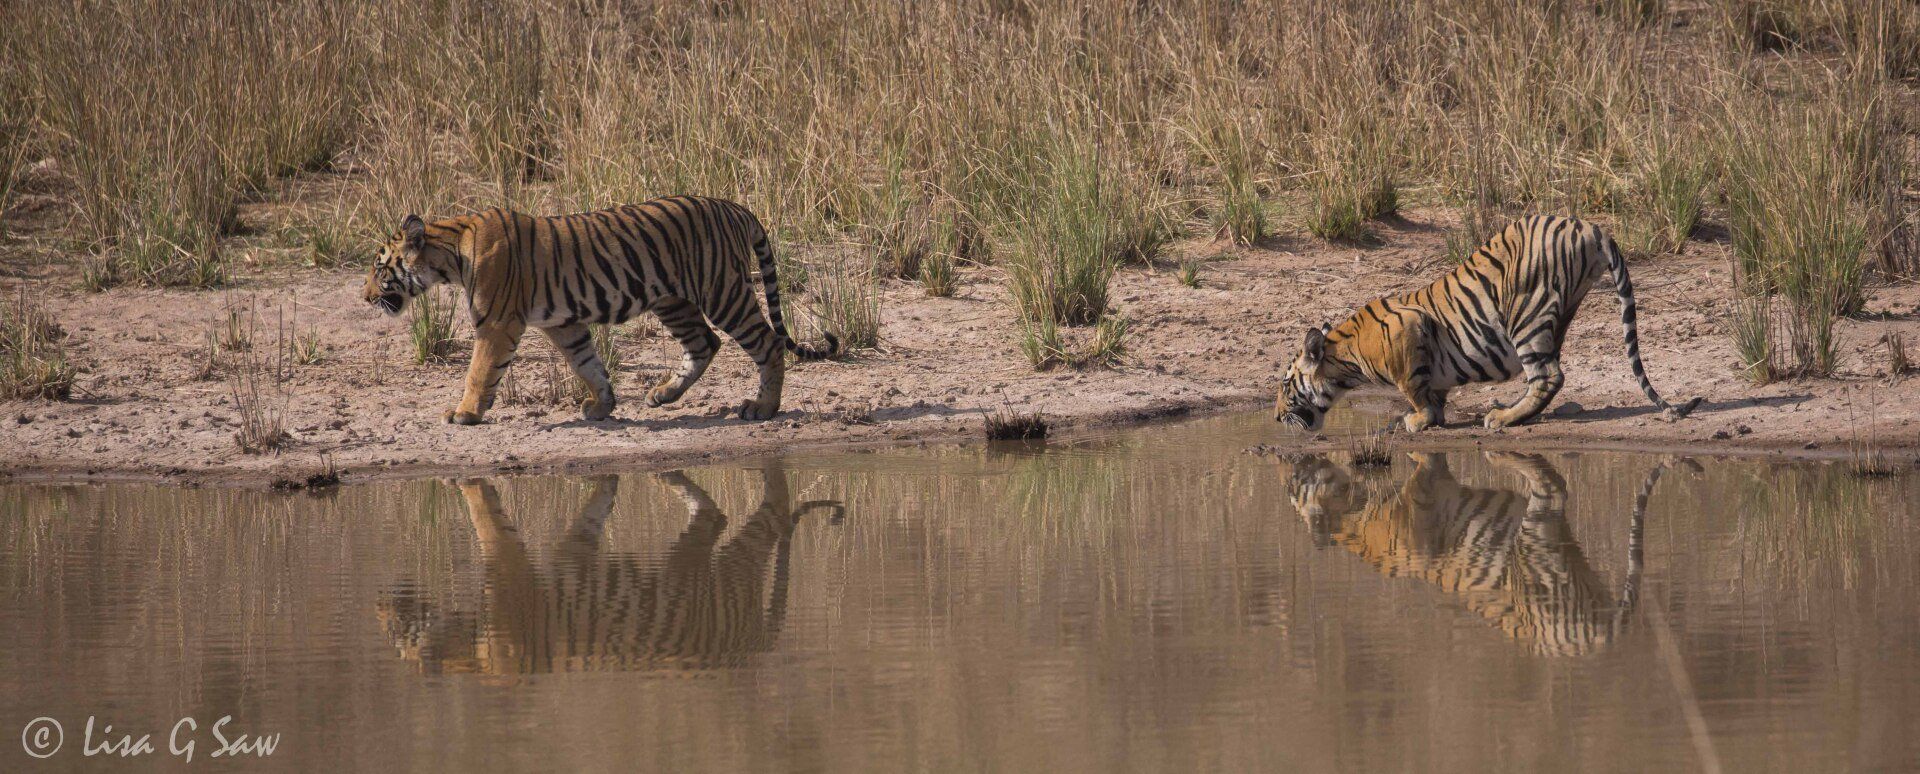 Two young tigers, walking by and drinking water